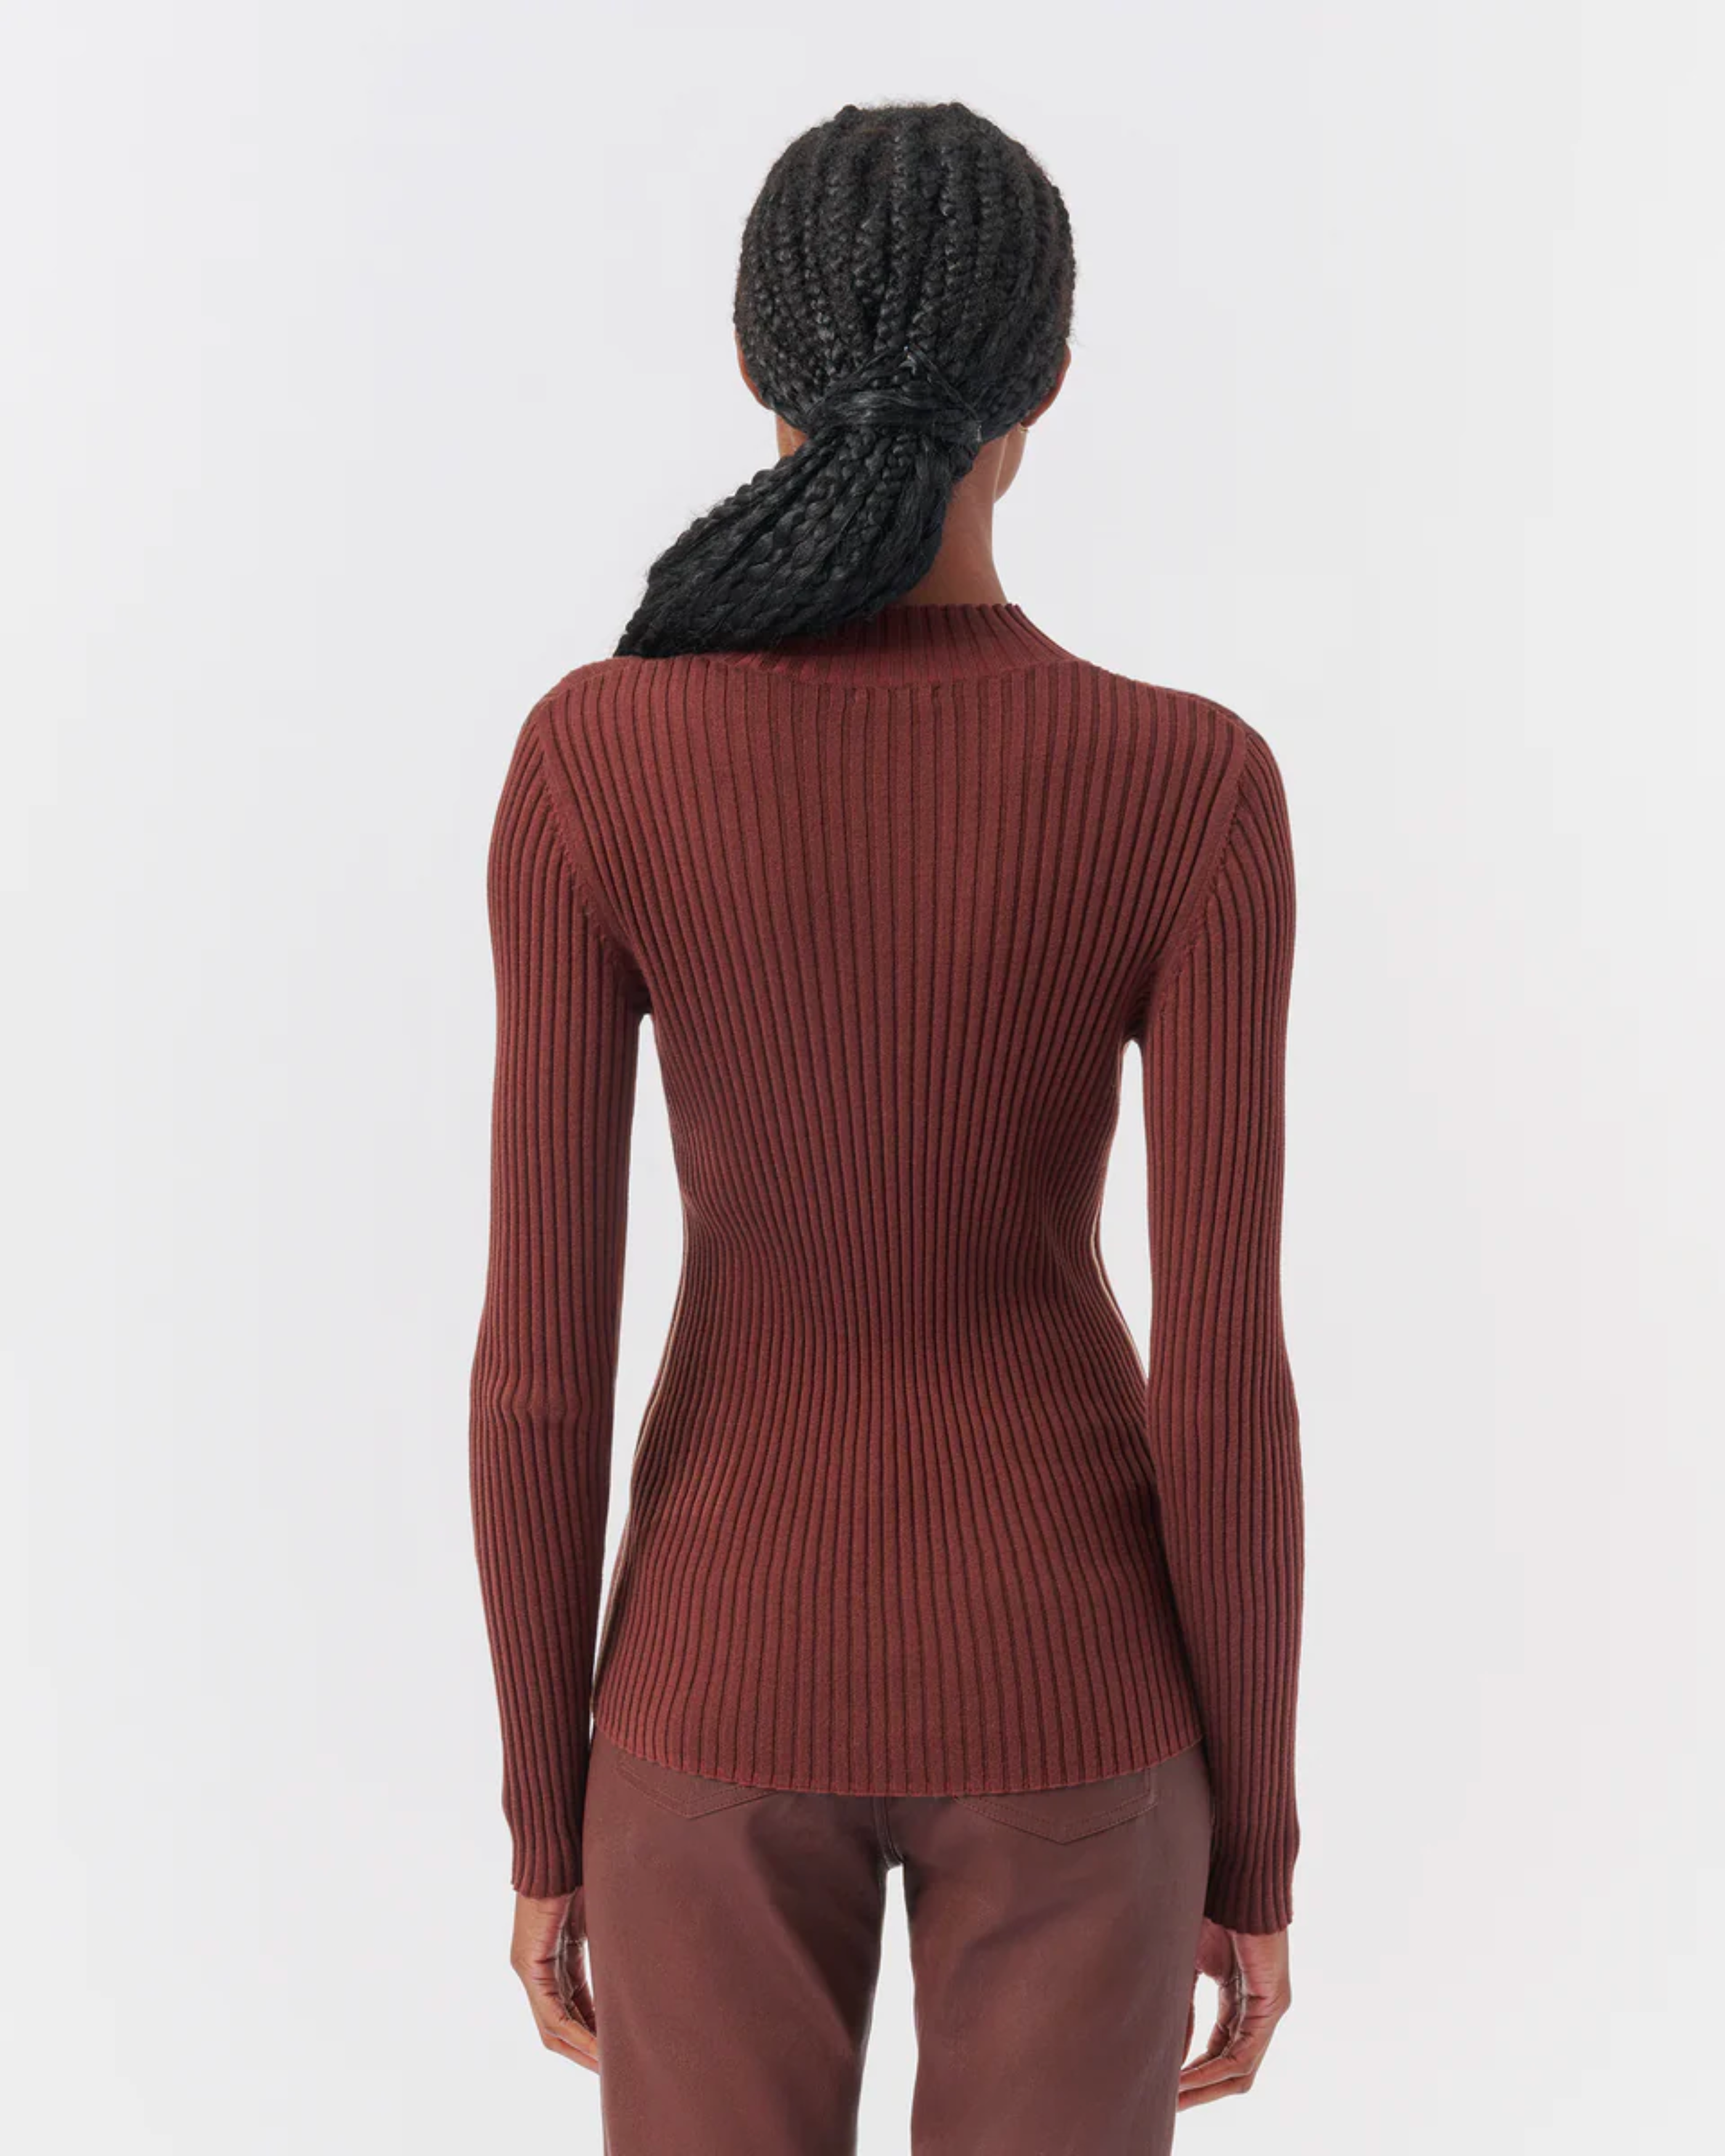 ATM Silk Cotton Mock Neck Sweater in Chocolate